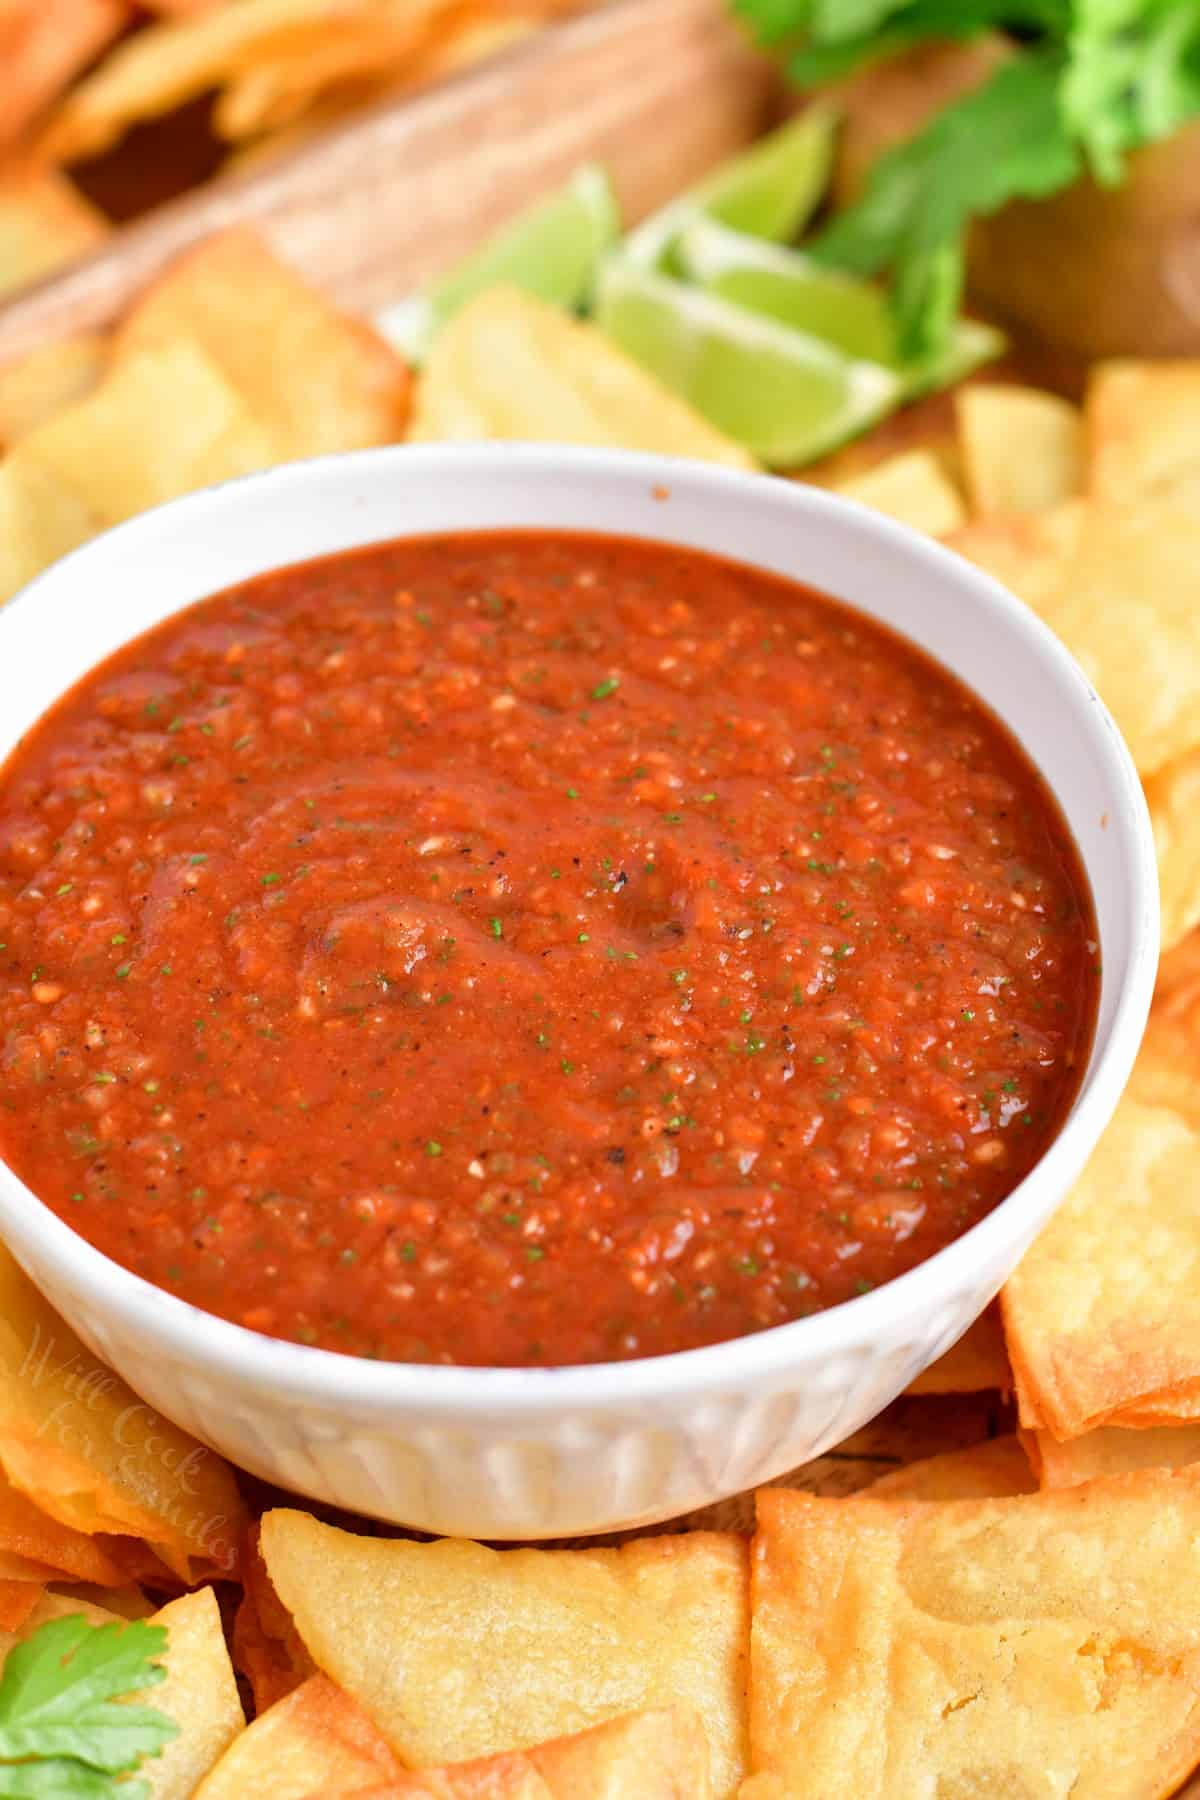 A small white bowl is filled with homemade red salsa.